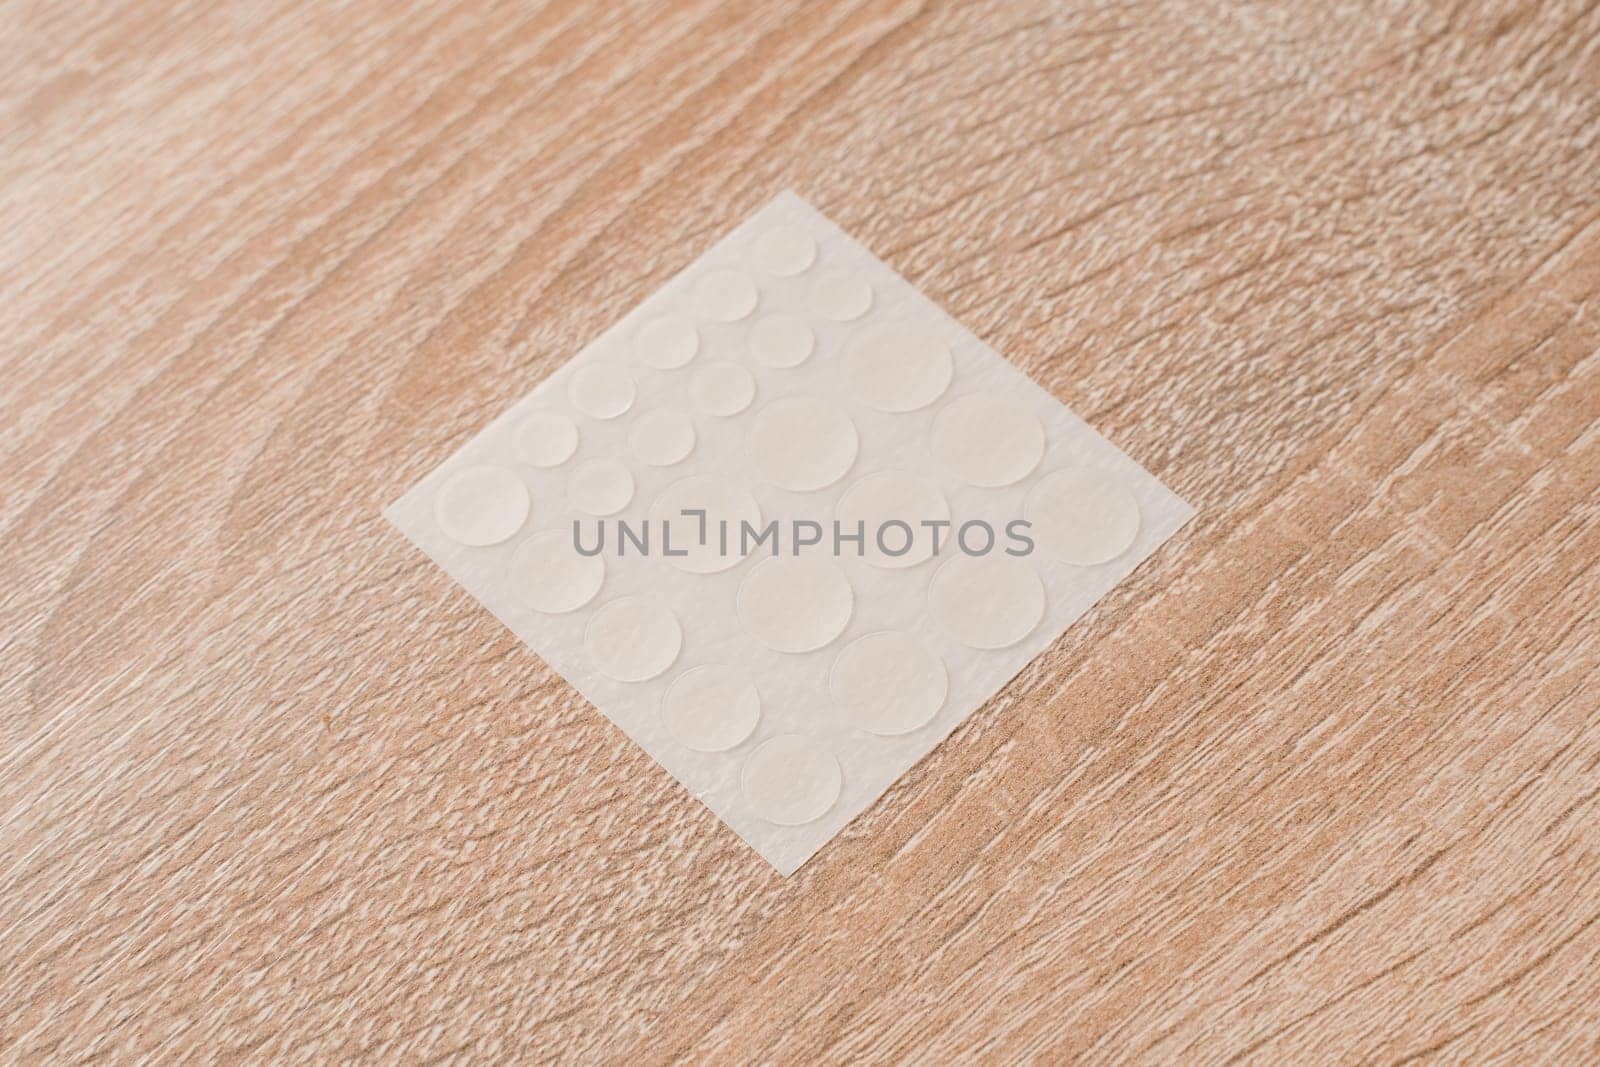 Set of round patches for acne on wooden background. Acne patches for the treatment of pimple and rosacea close-up. Facial rejuvenation cleansing cosmetology